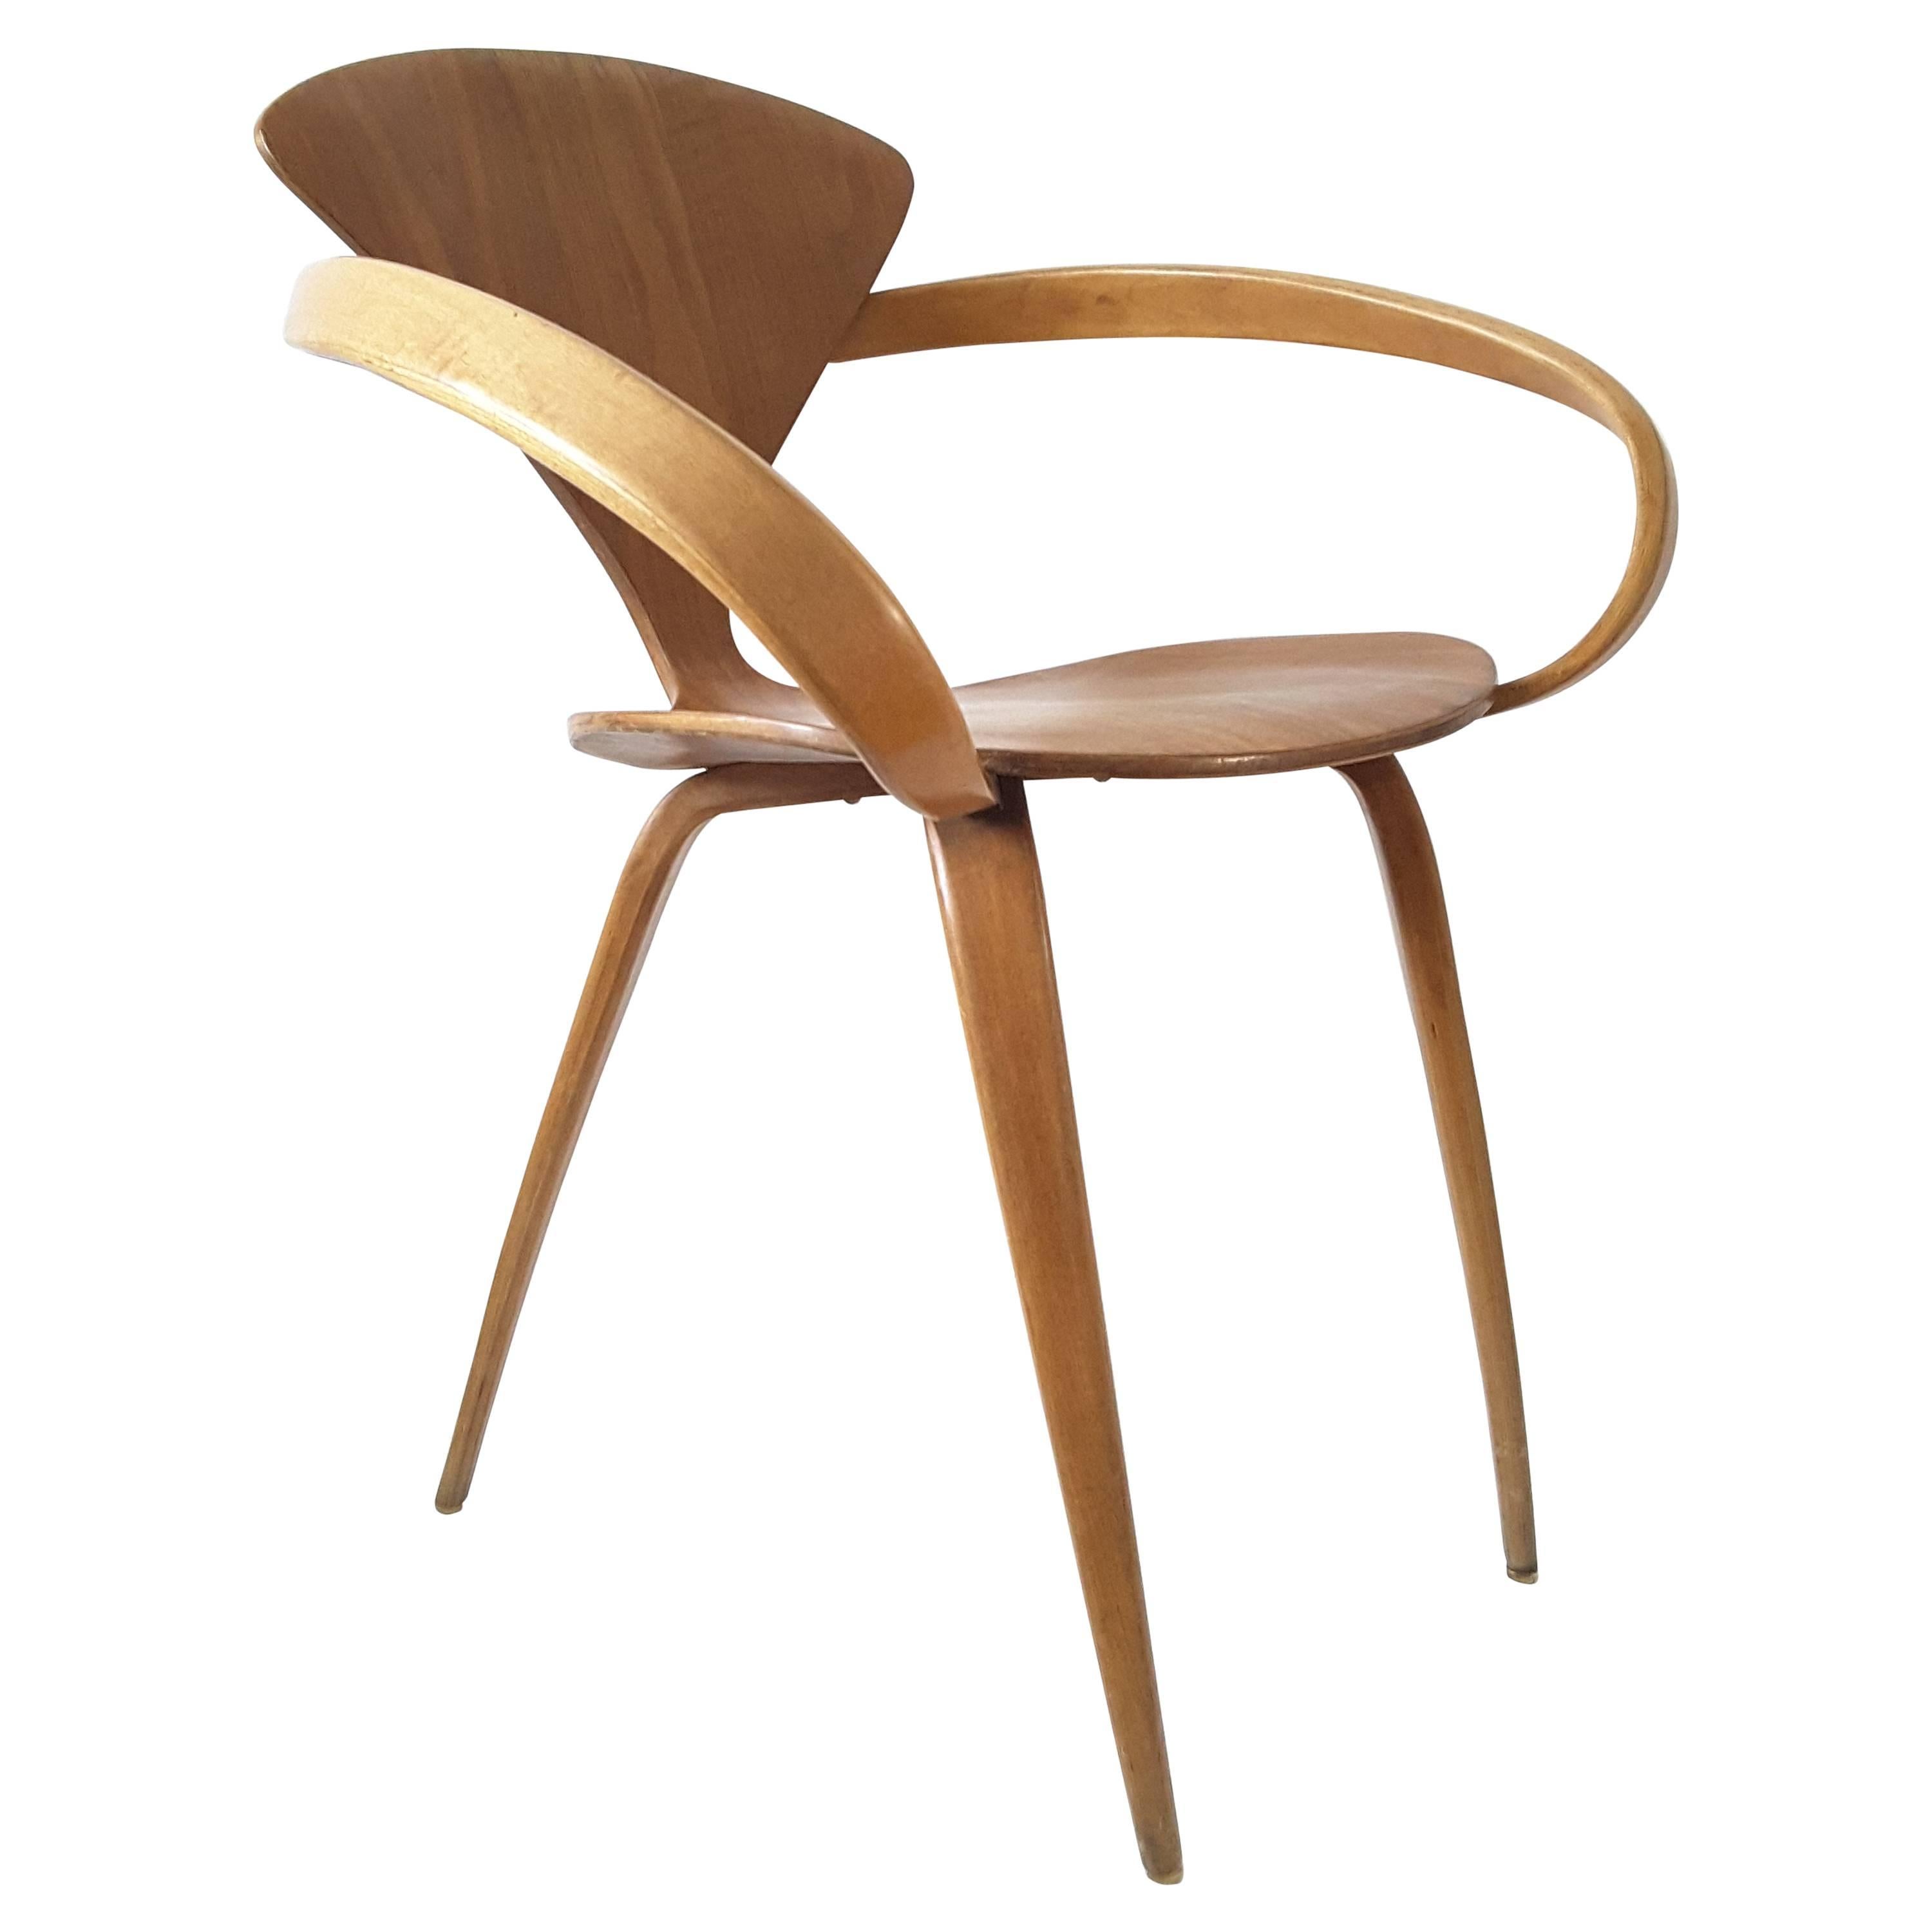 Mid-Century Bent Plywood Cherner Chair Designed by Norman Cherner for Plycraft